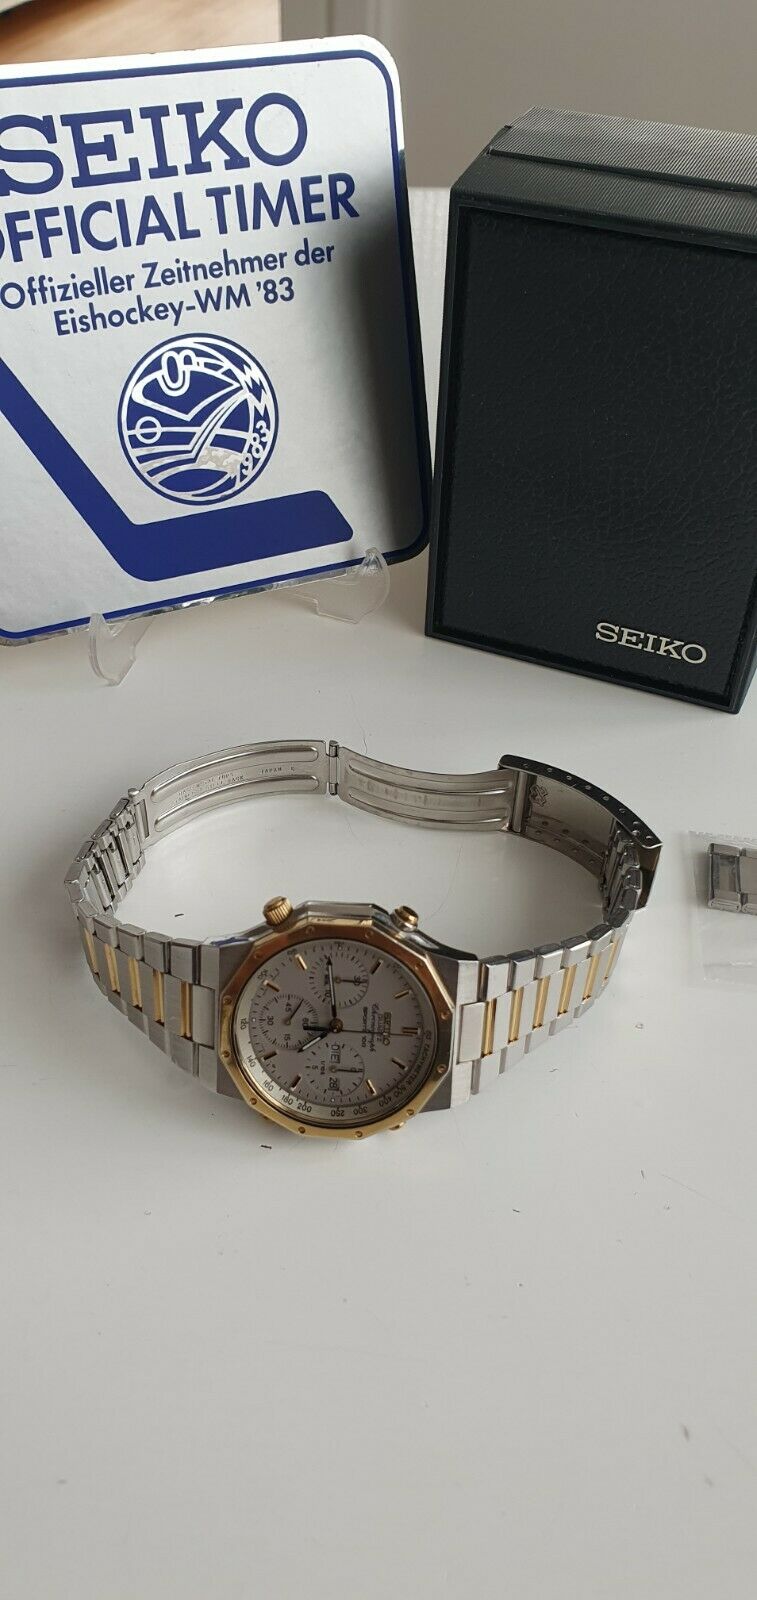 7A38-7020-Stainless+Gold-GreyFace-eBay(Germany)-Sept2021-(SeikoOfficialTimer)-9.jpg